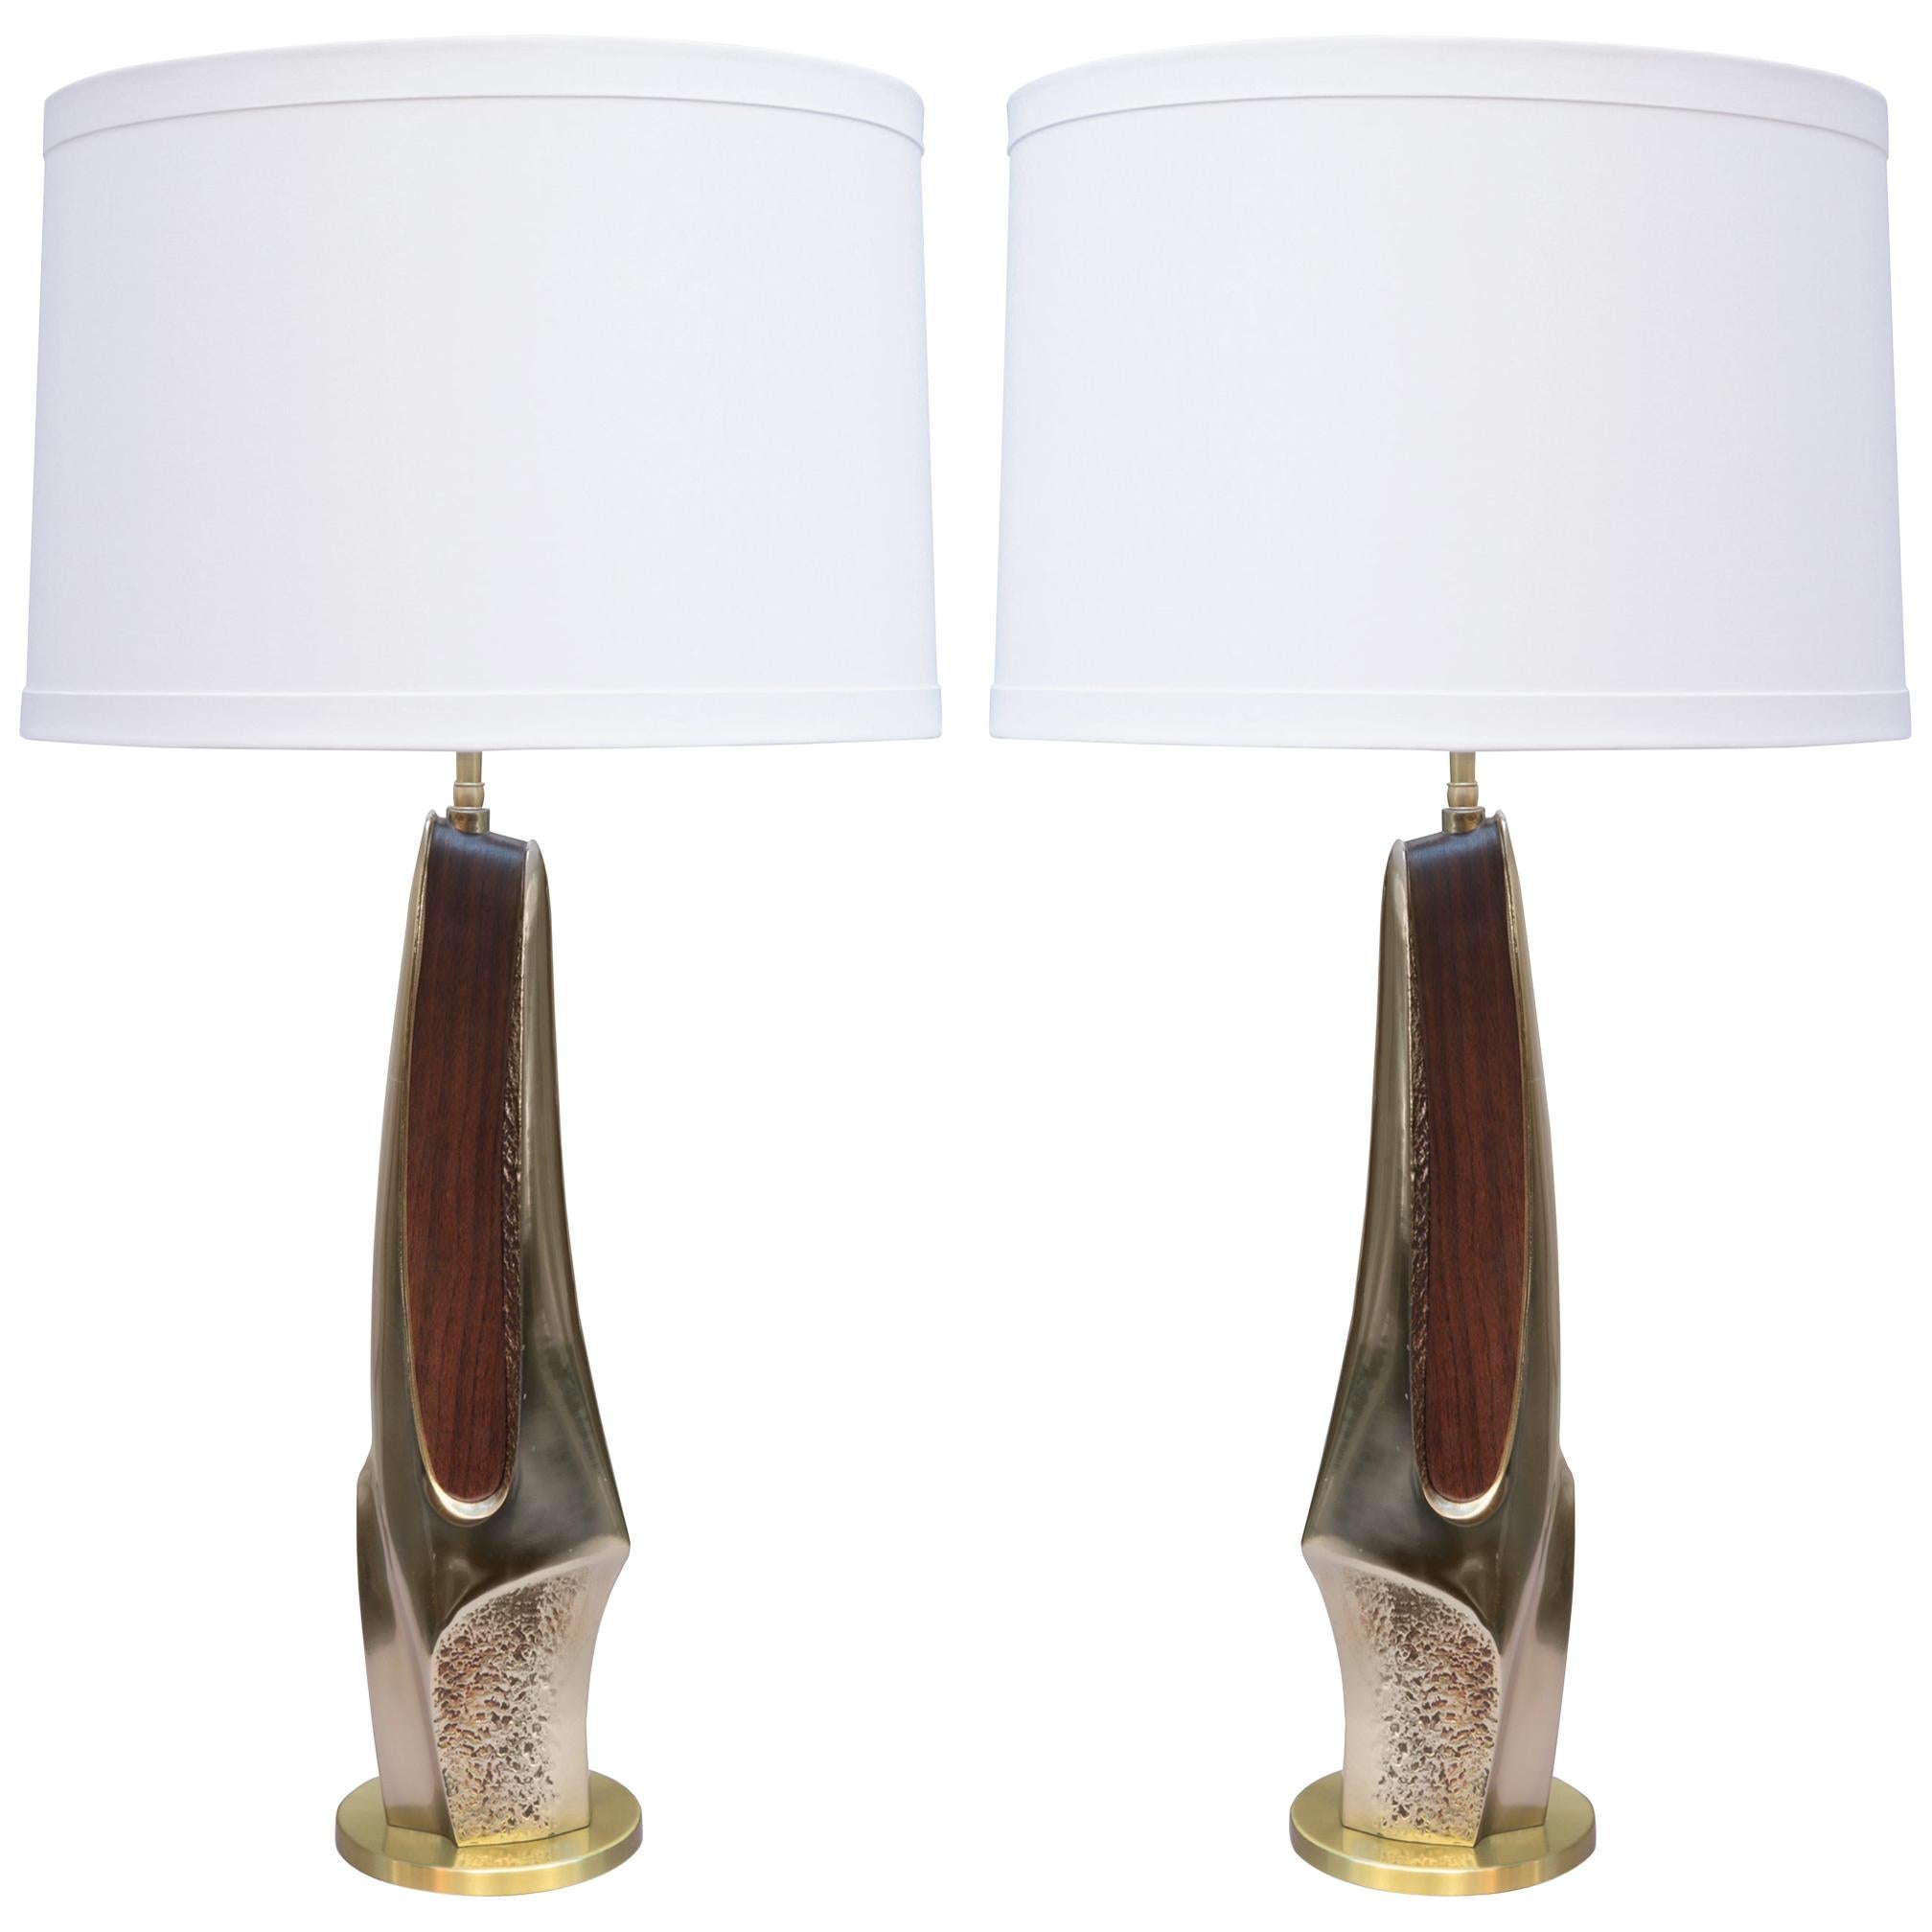 Pair of Sculptural Mid-Century Modern Table Lamp